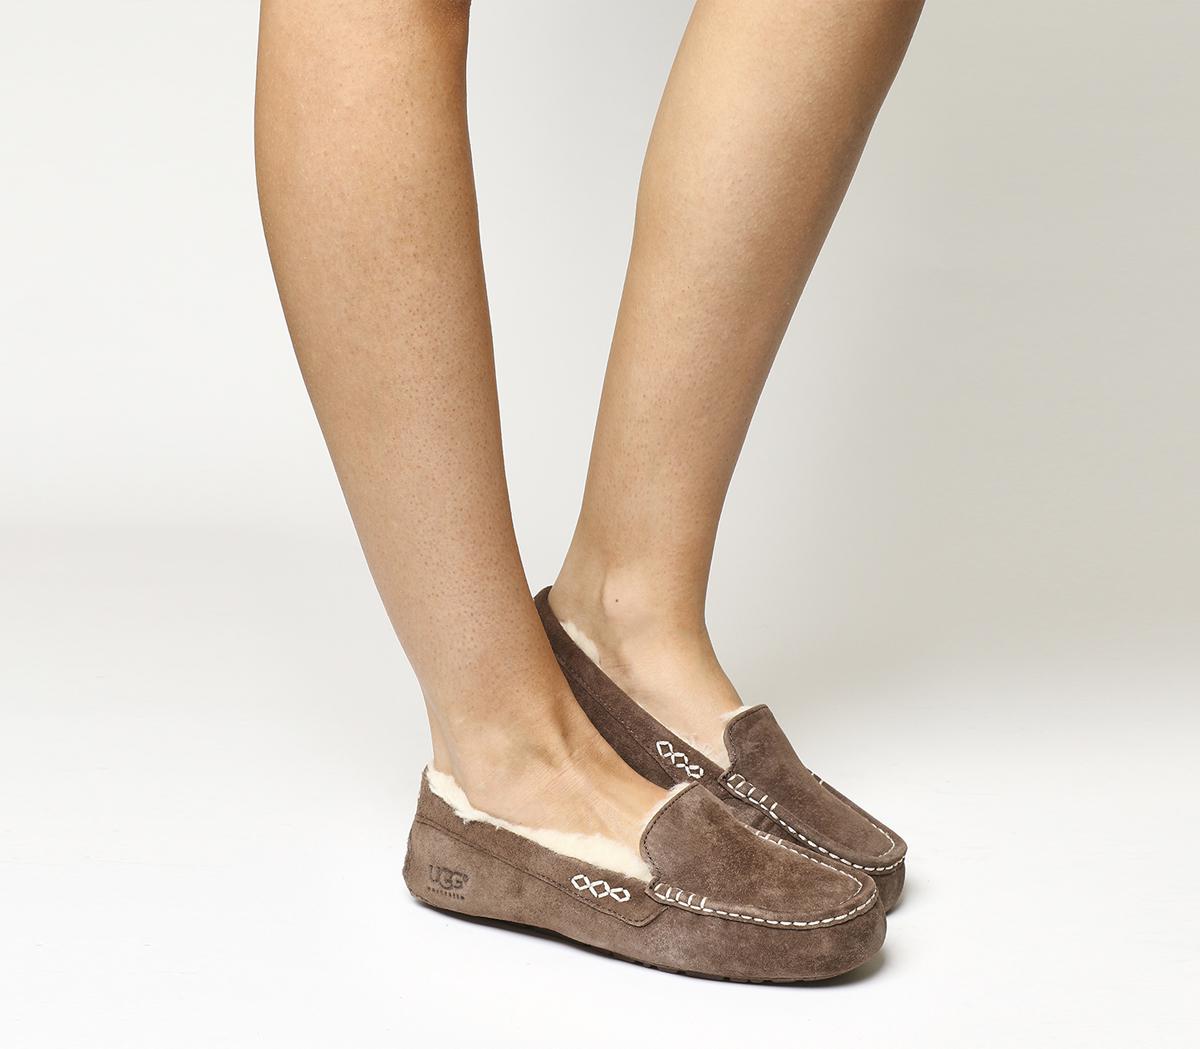 UGG Suede Ansley Slippers in Chocolate 